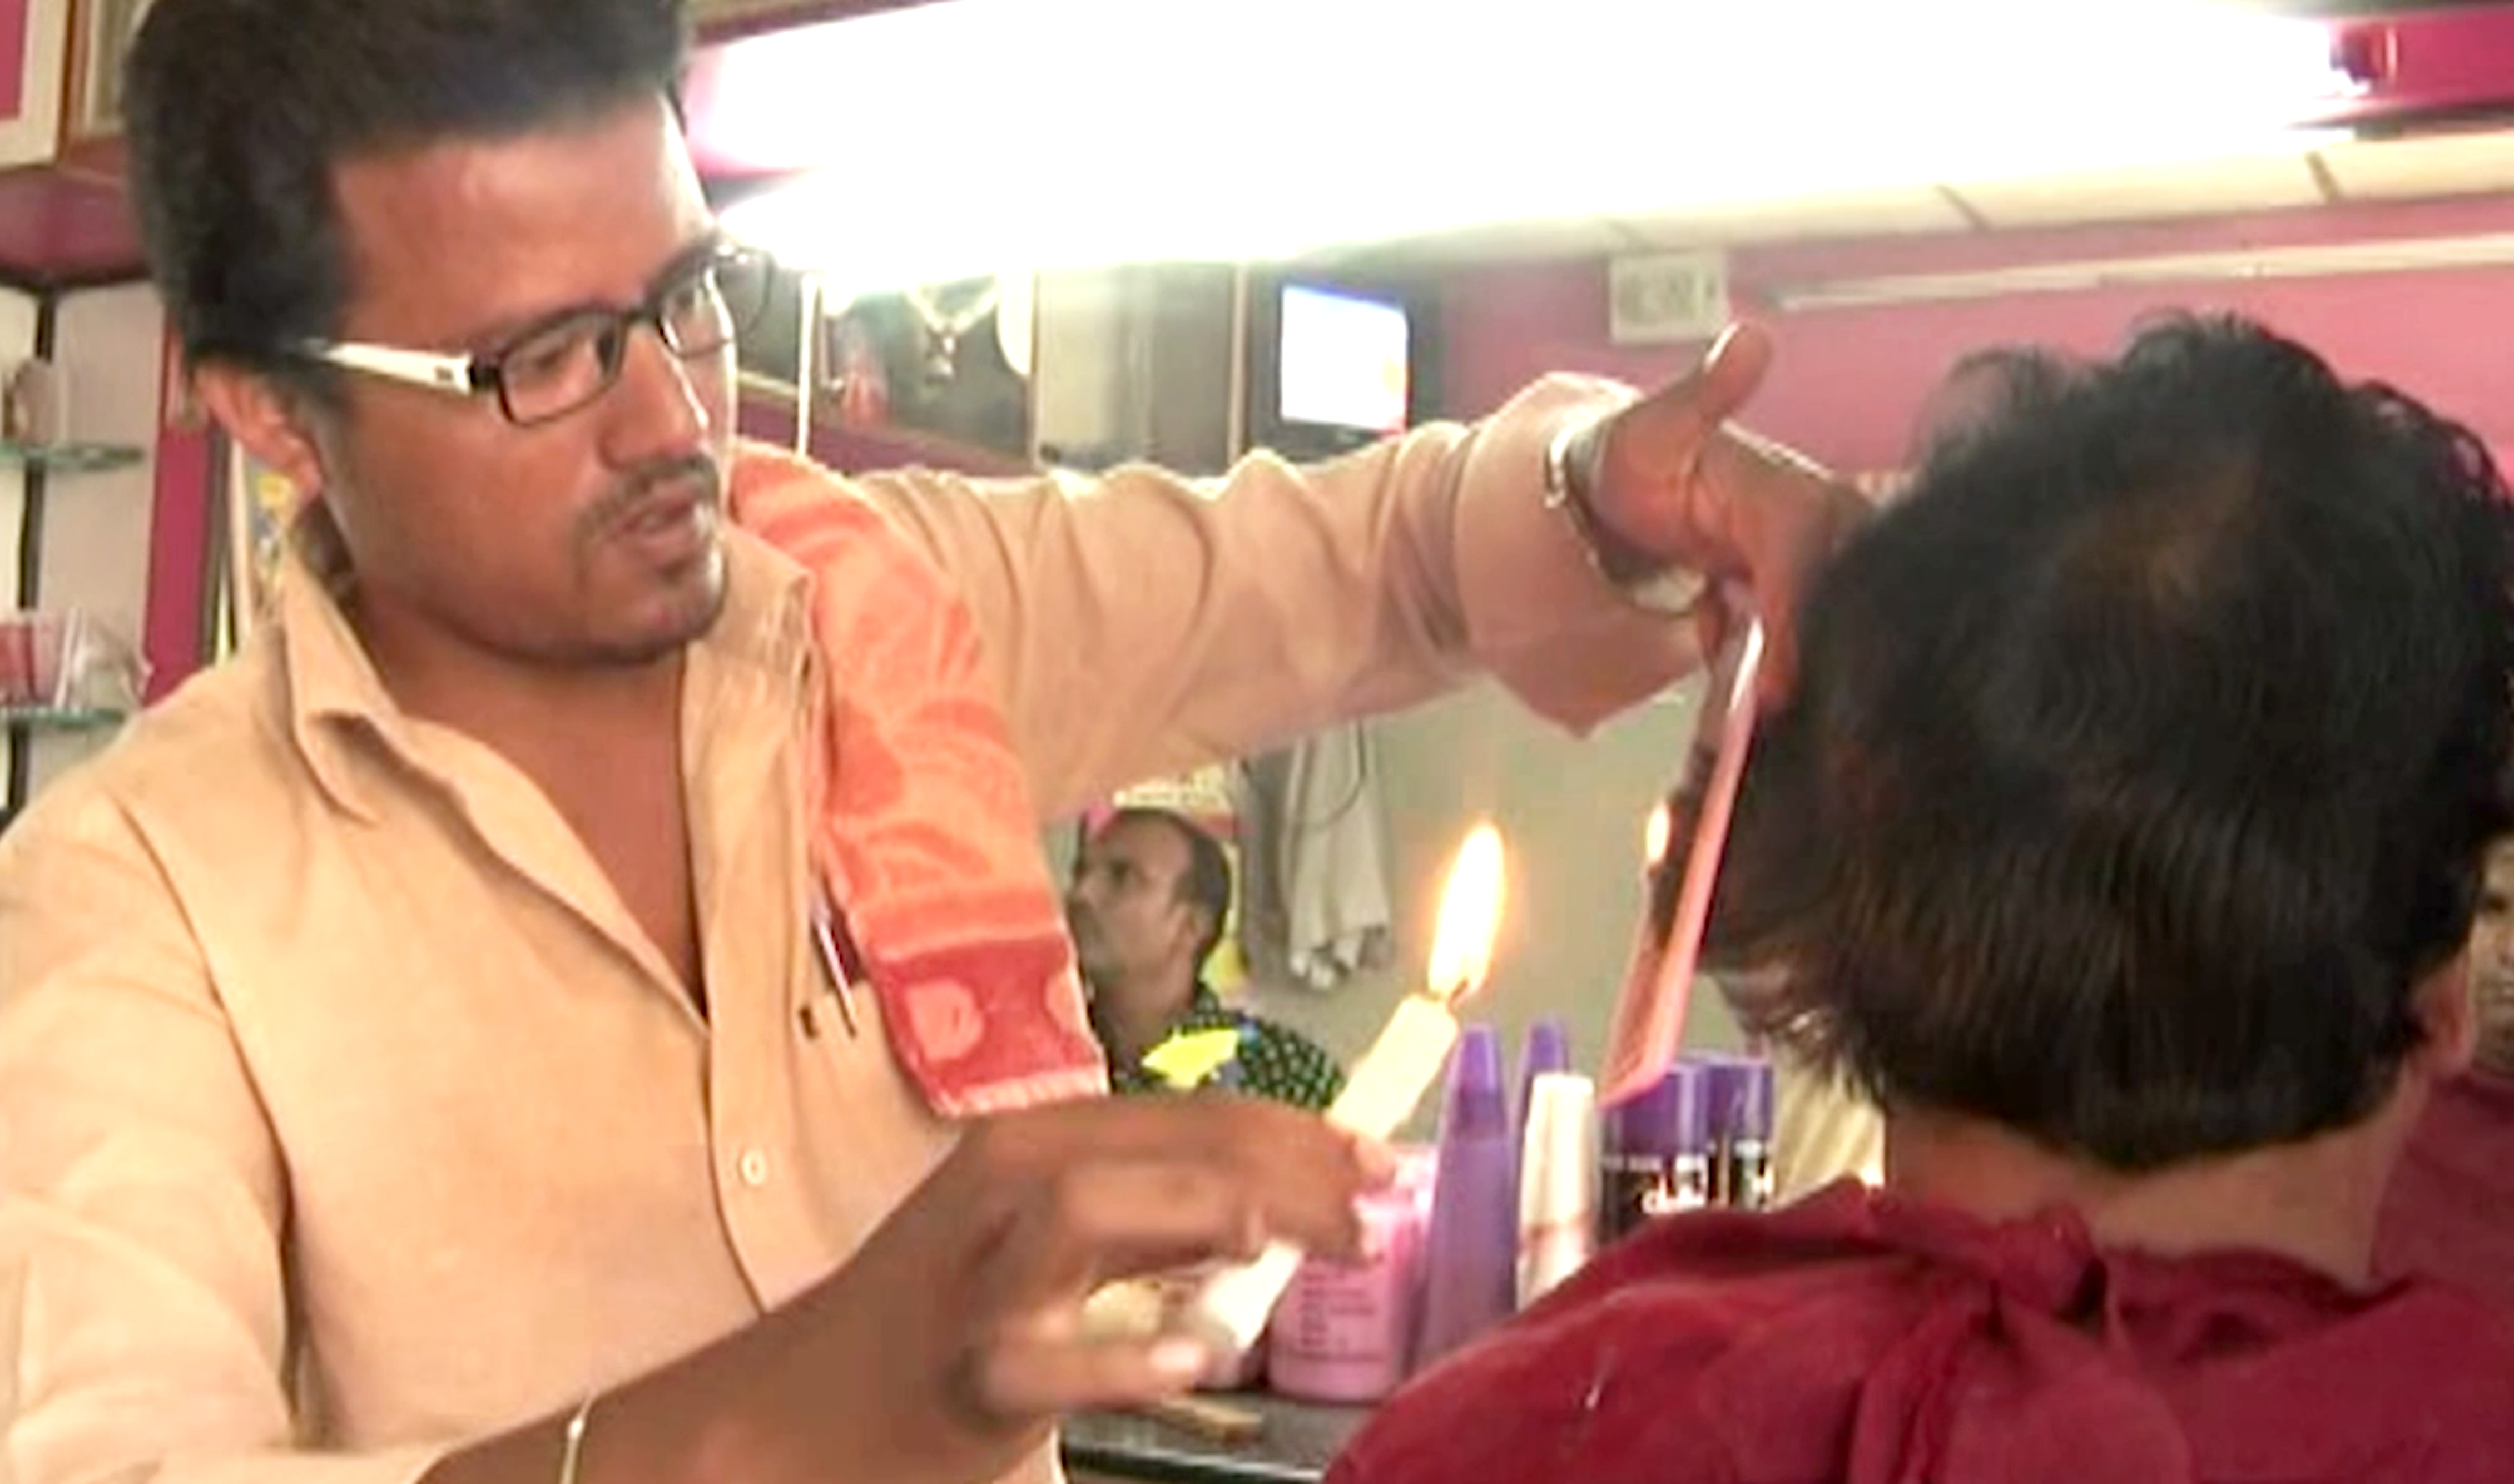 Here in this salon, barber uses candles for haircuts